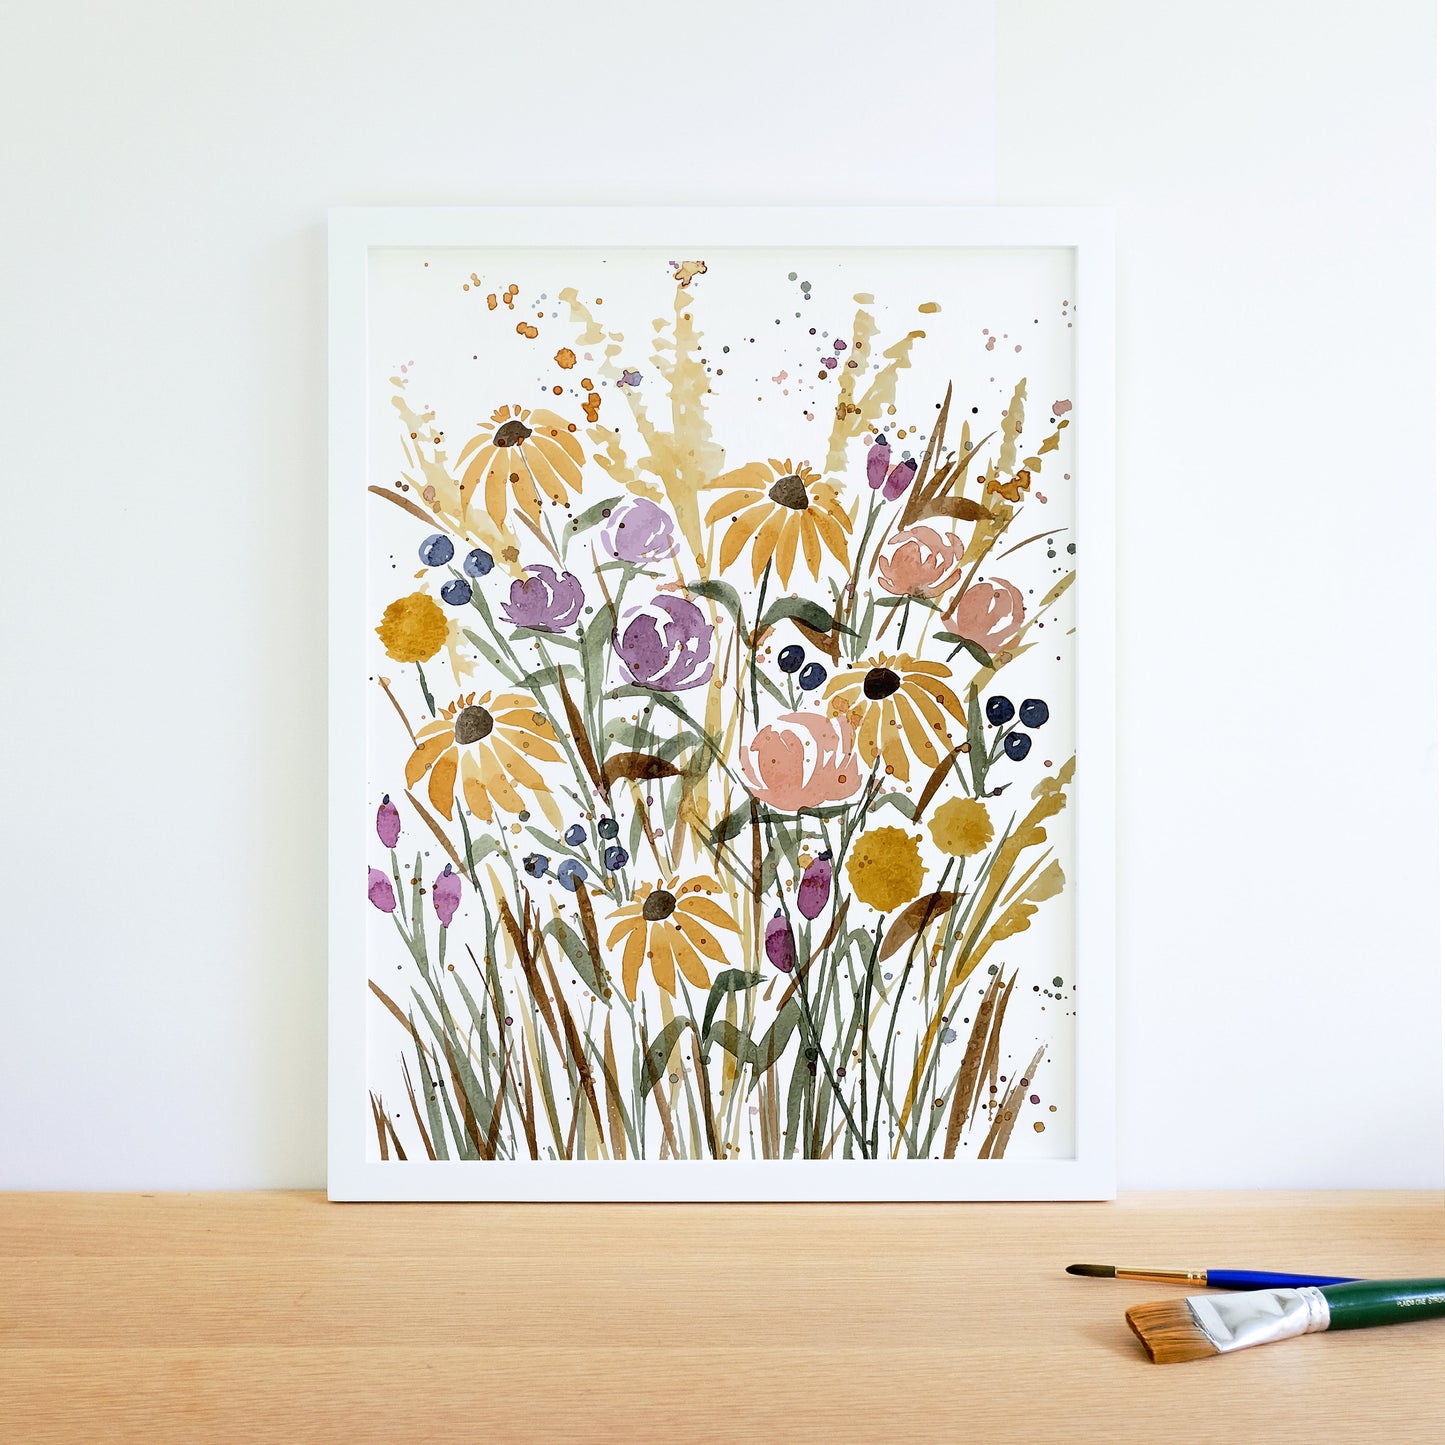 Watercolor Fall Flower Field - Printable Fine Art - Digital Download, Print at Home - Autumn Colors, Home Decor